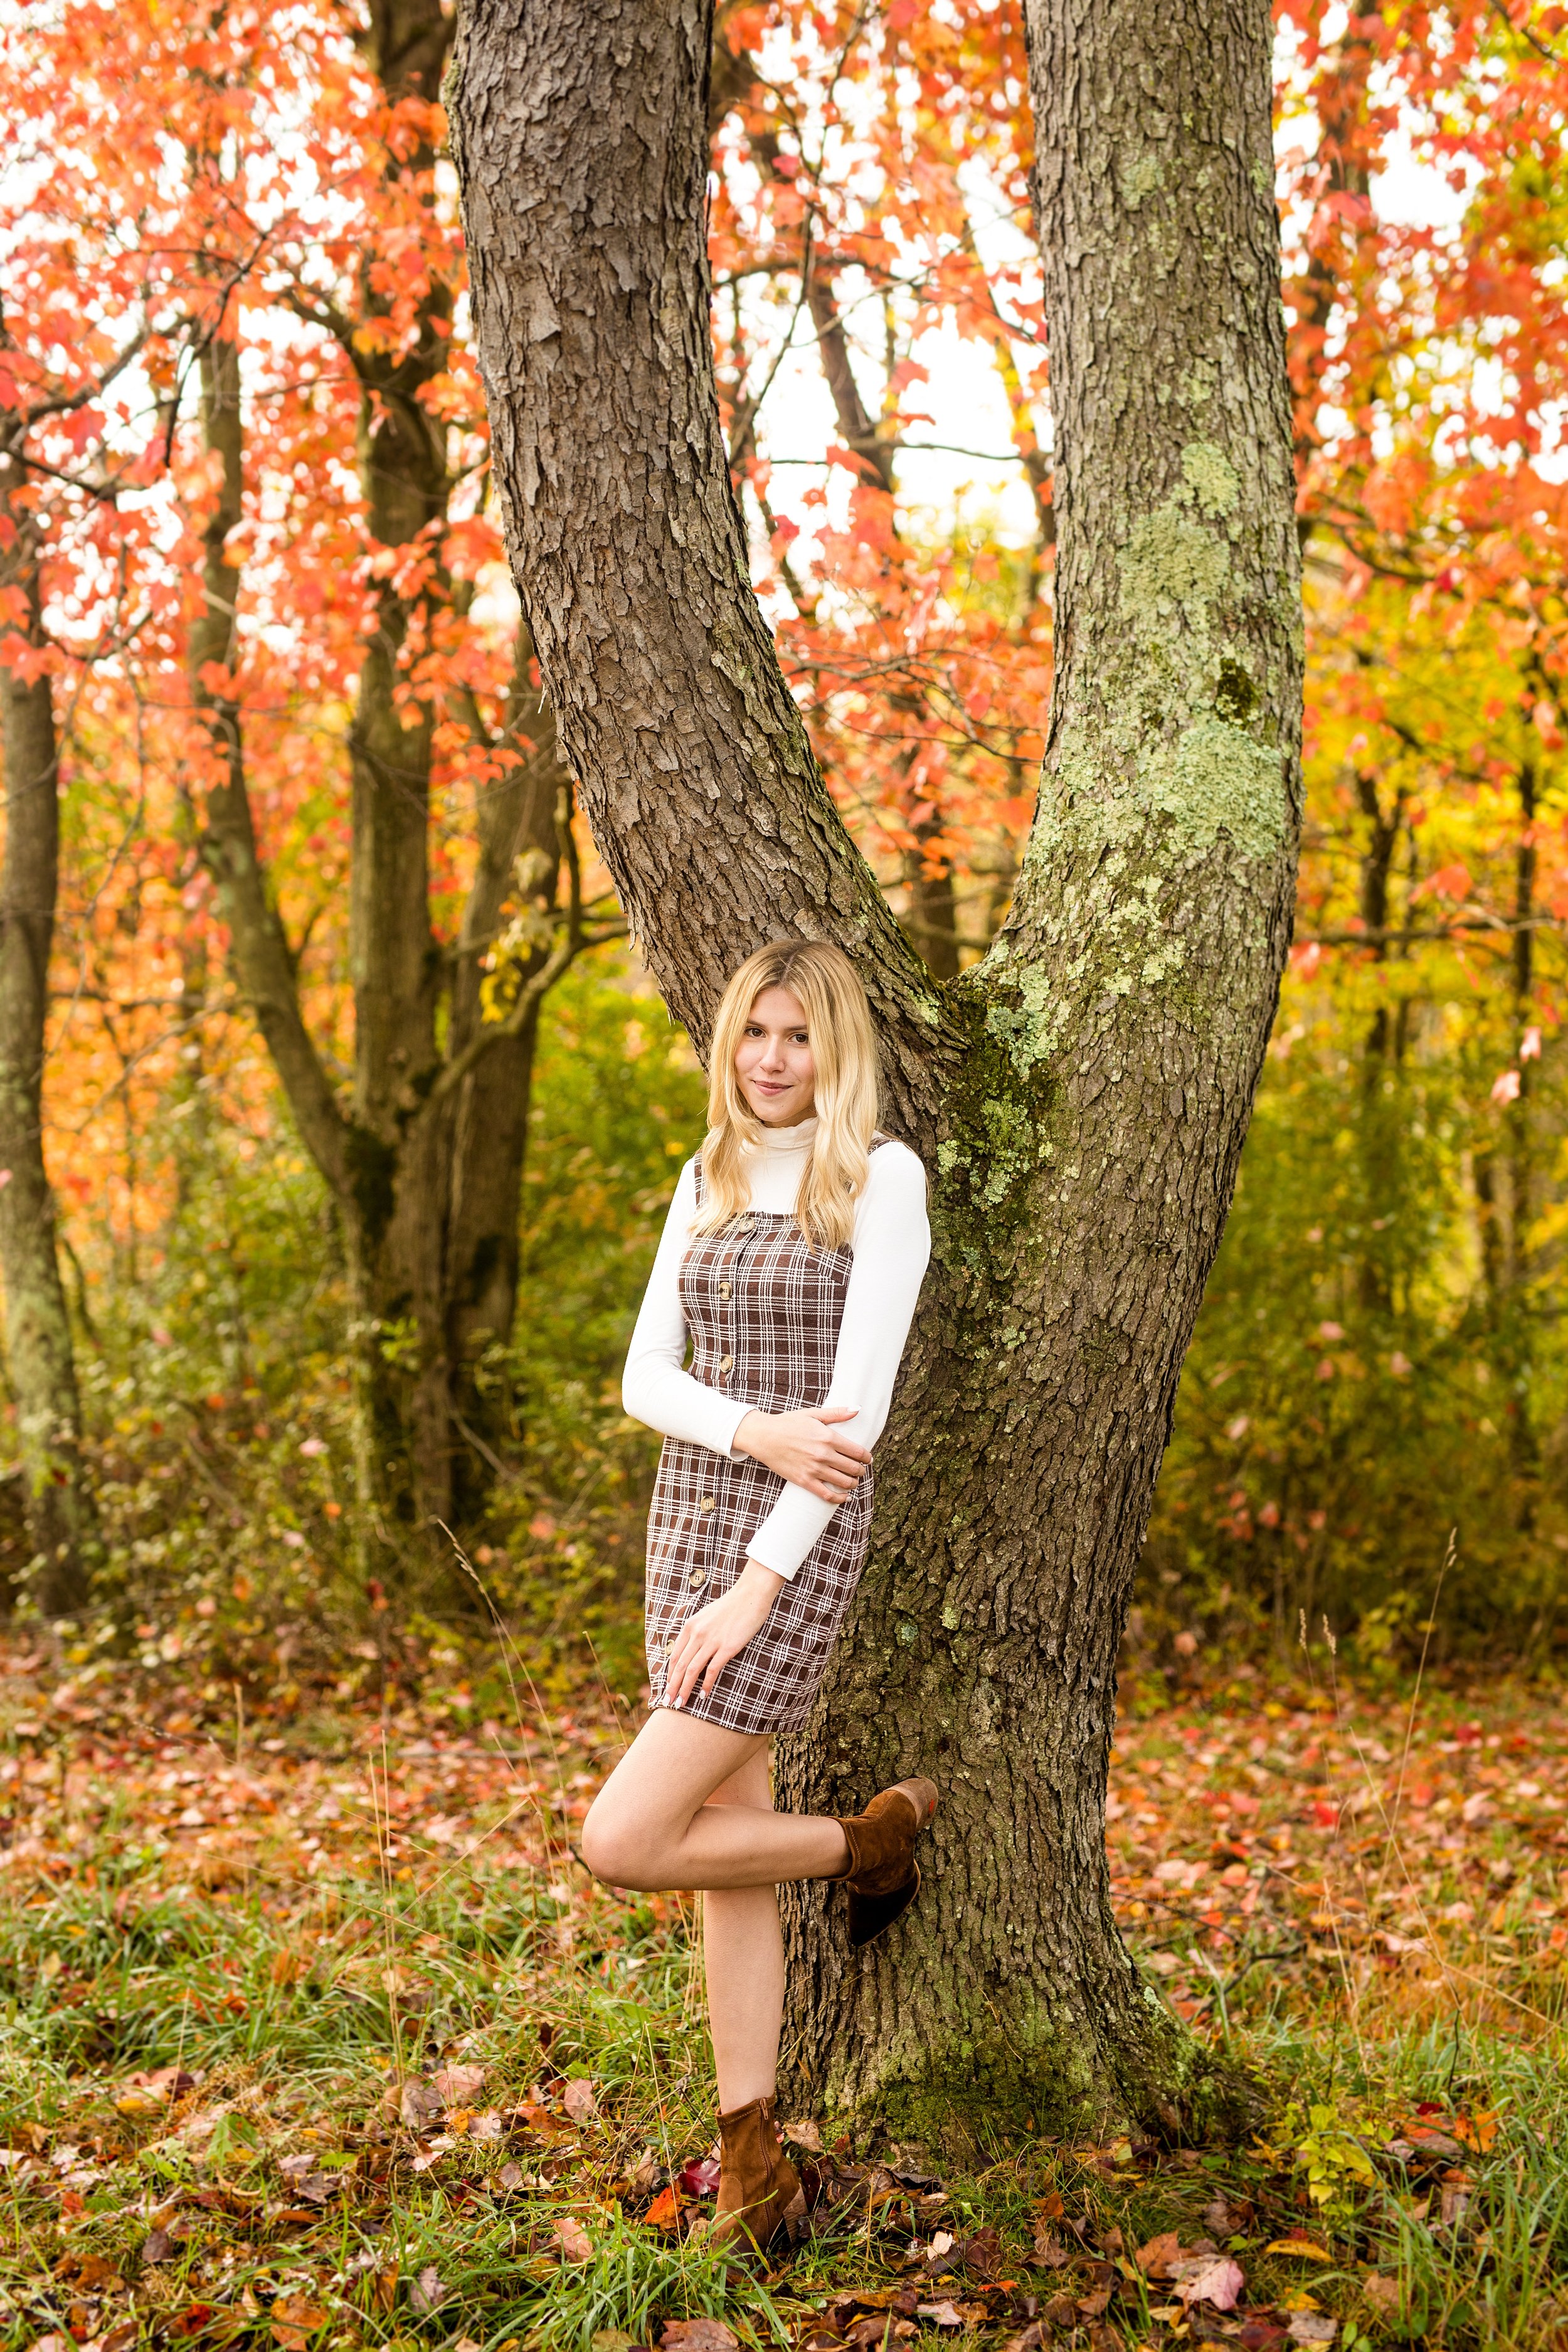 butler county senior photo locations, senior picture location ideas butler county, cranberry township senior photos, zelienople senior photos, mars senior photos, moraine state park senior photos